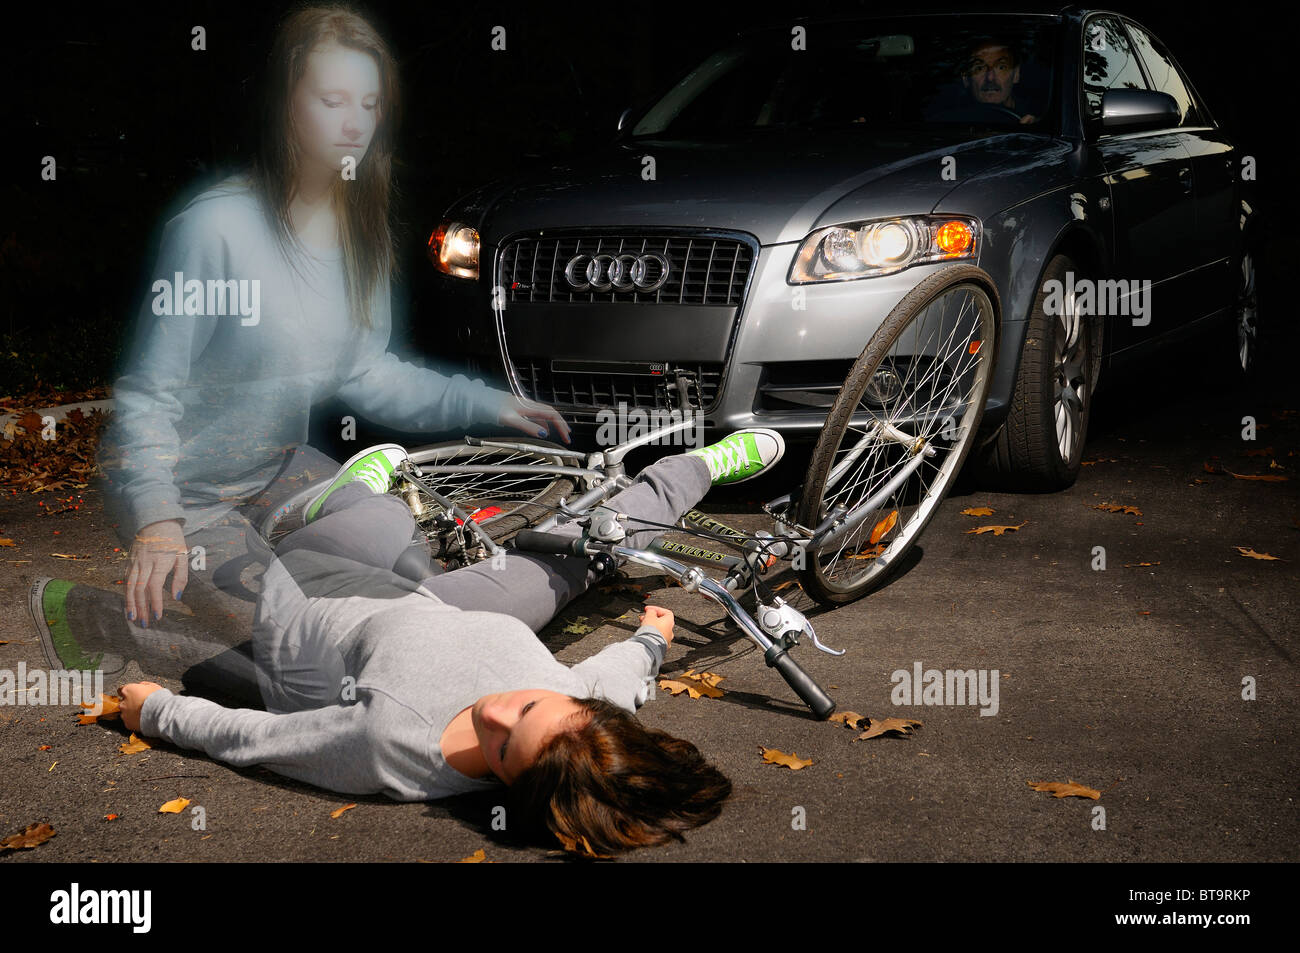 Fearful man in car stopped at a fallen young female bicyclist dead on the road with her ghost spirit rising from the accident Stock Photo